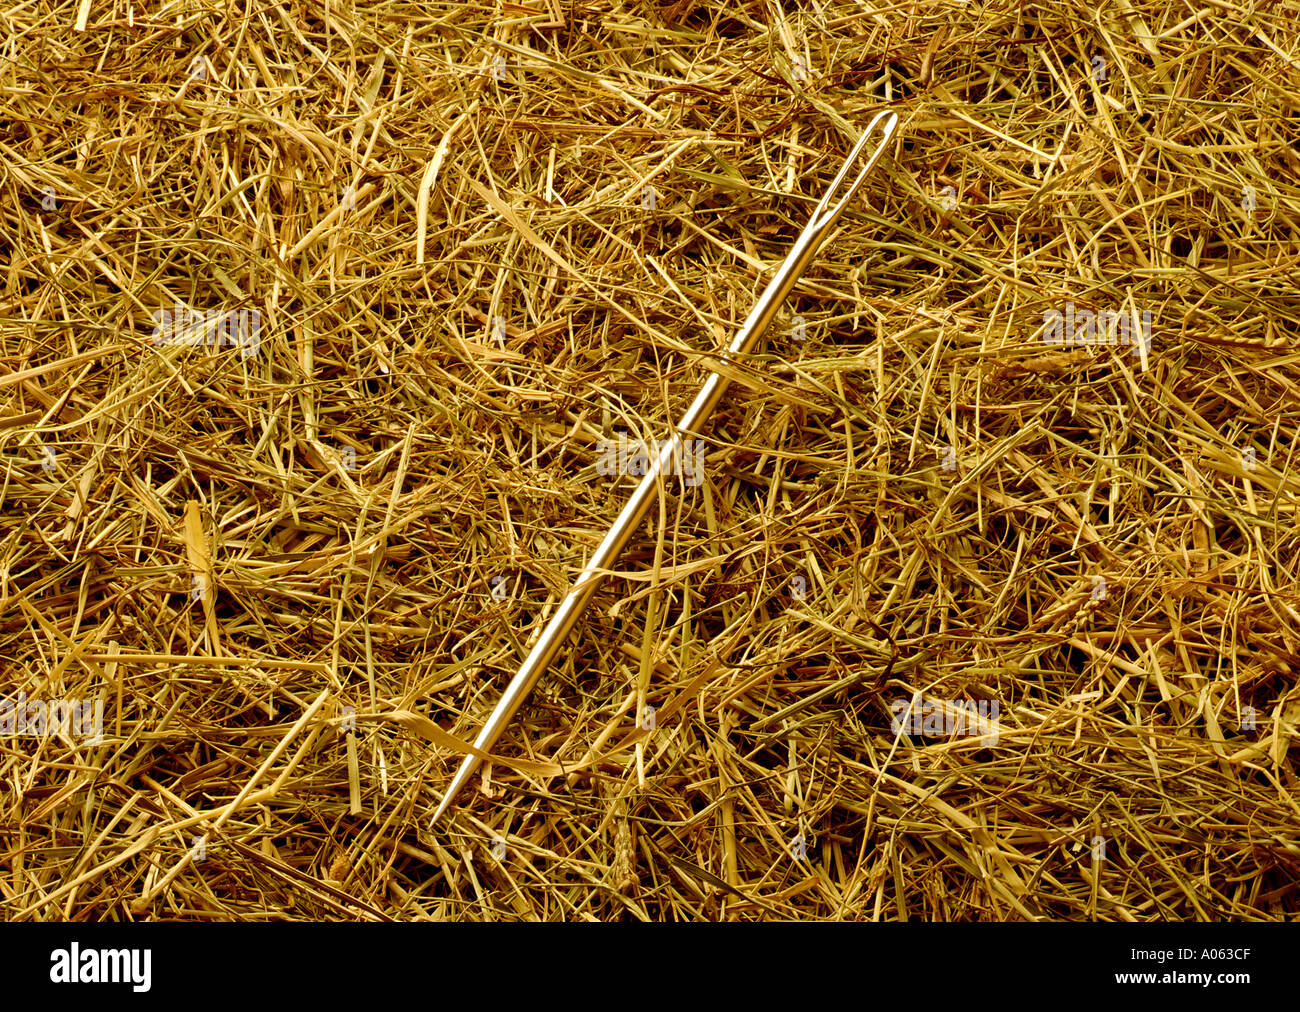 Needle in a Haystack Stock Photo